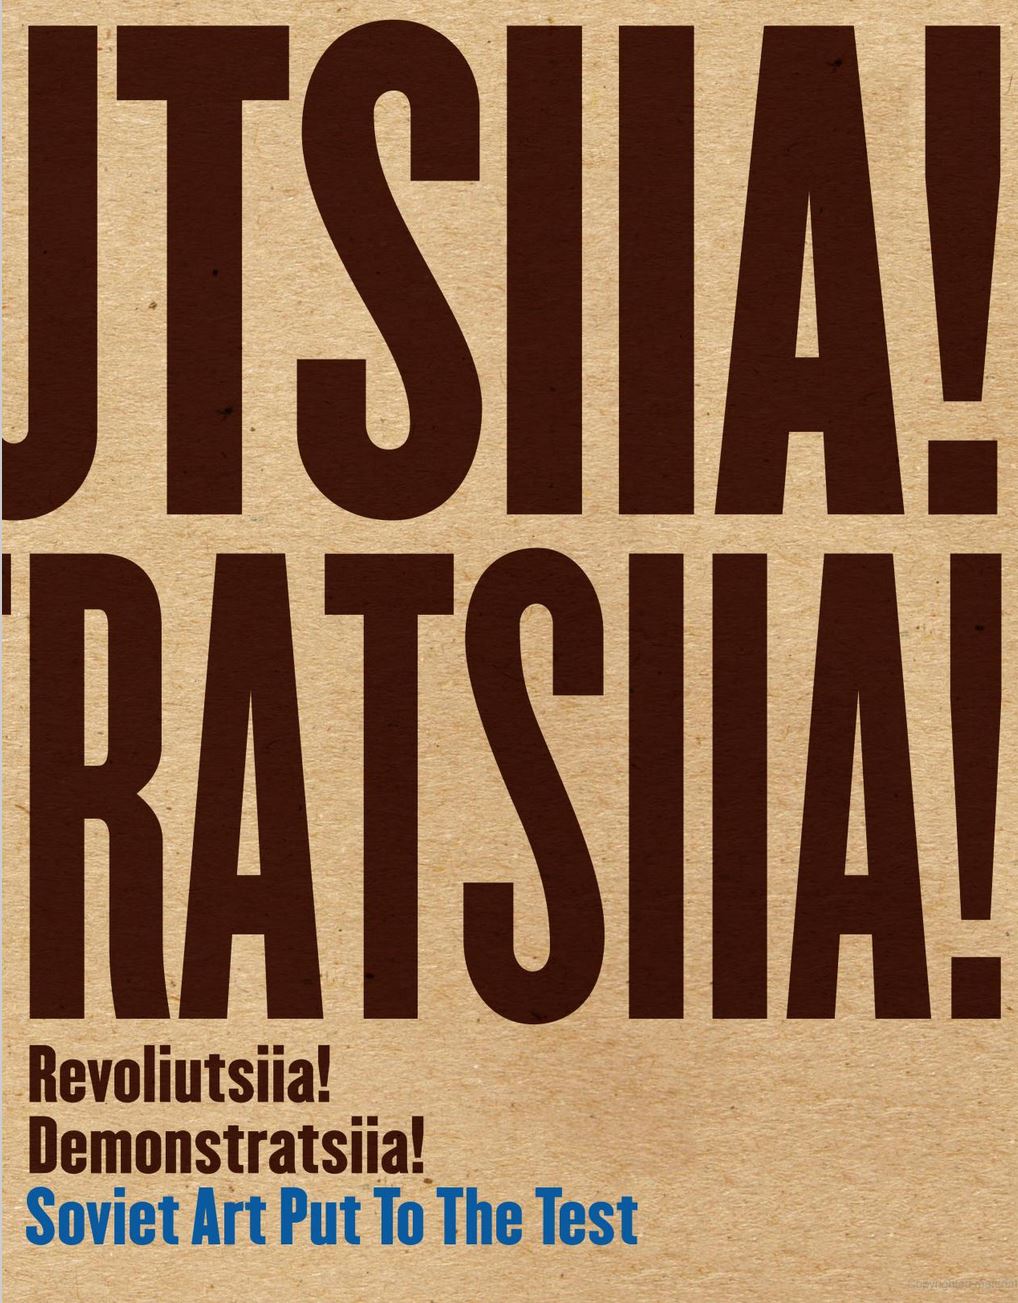 Russia Art cover text